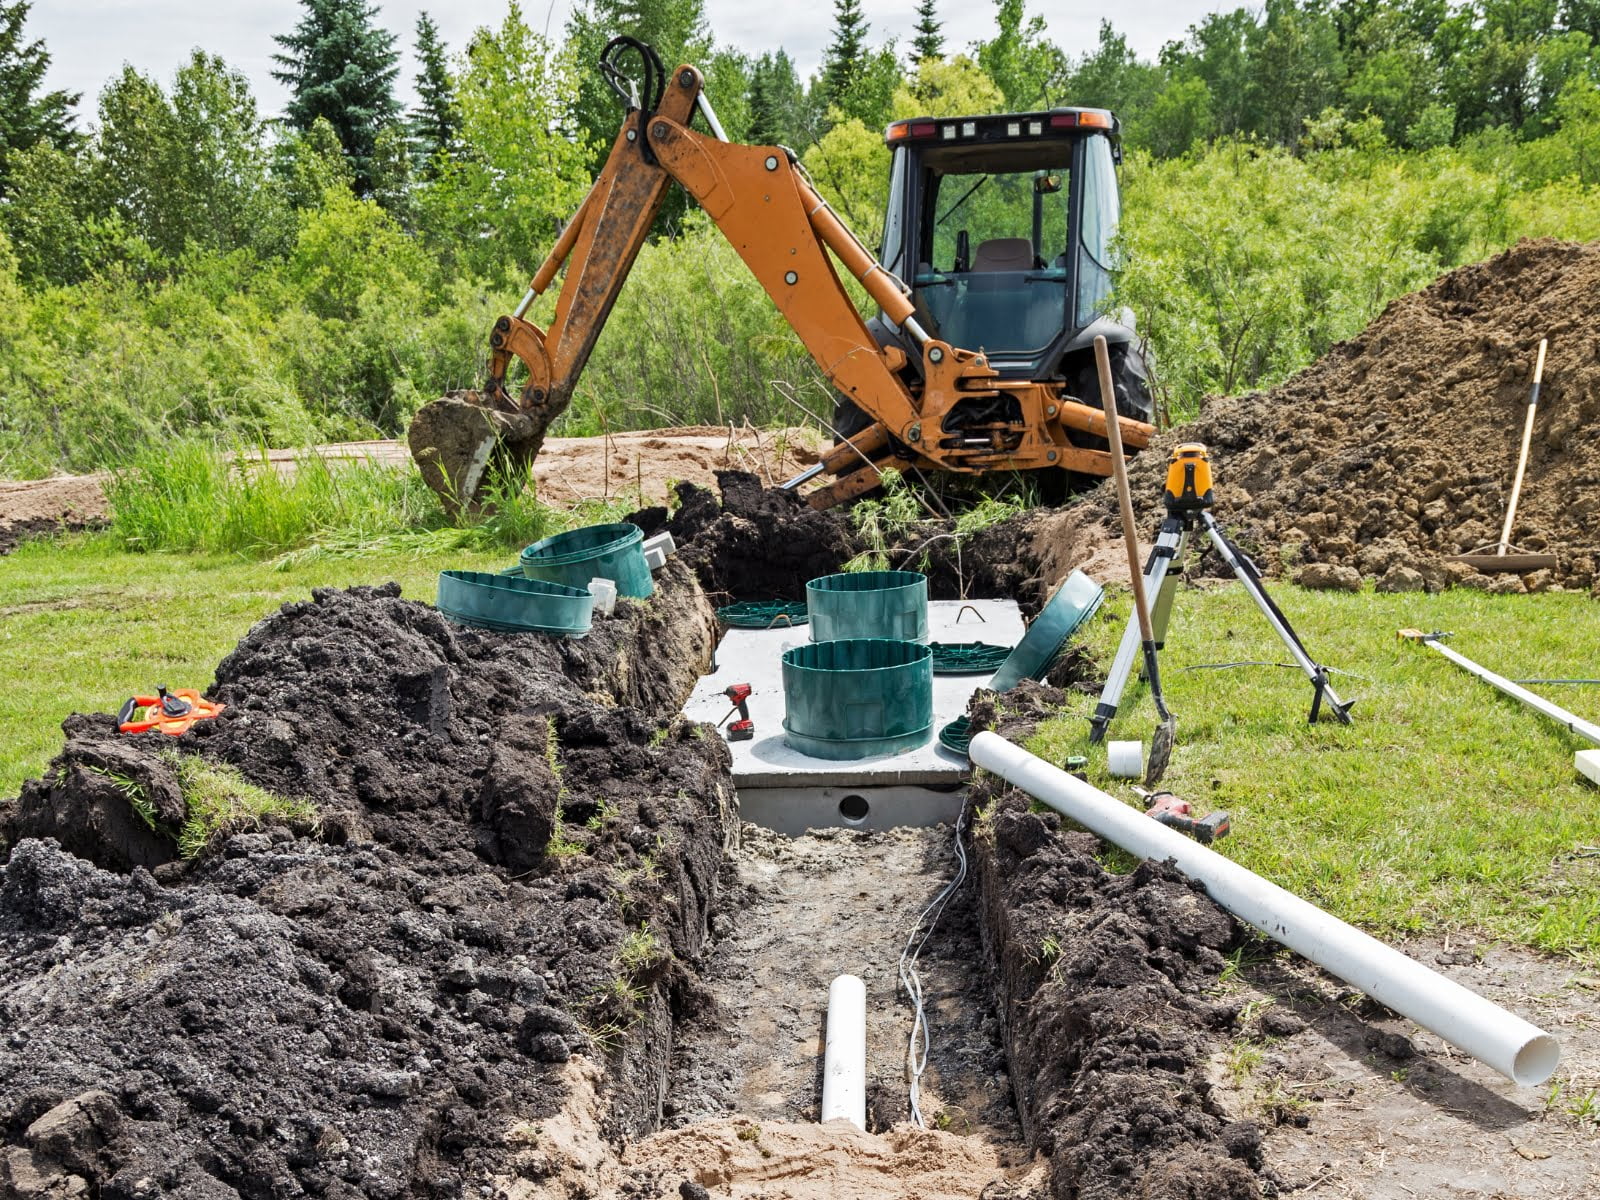 Septic tank installation with an excavator in a drain field.